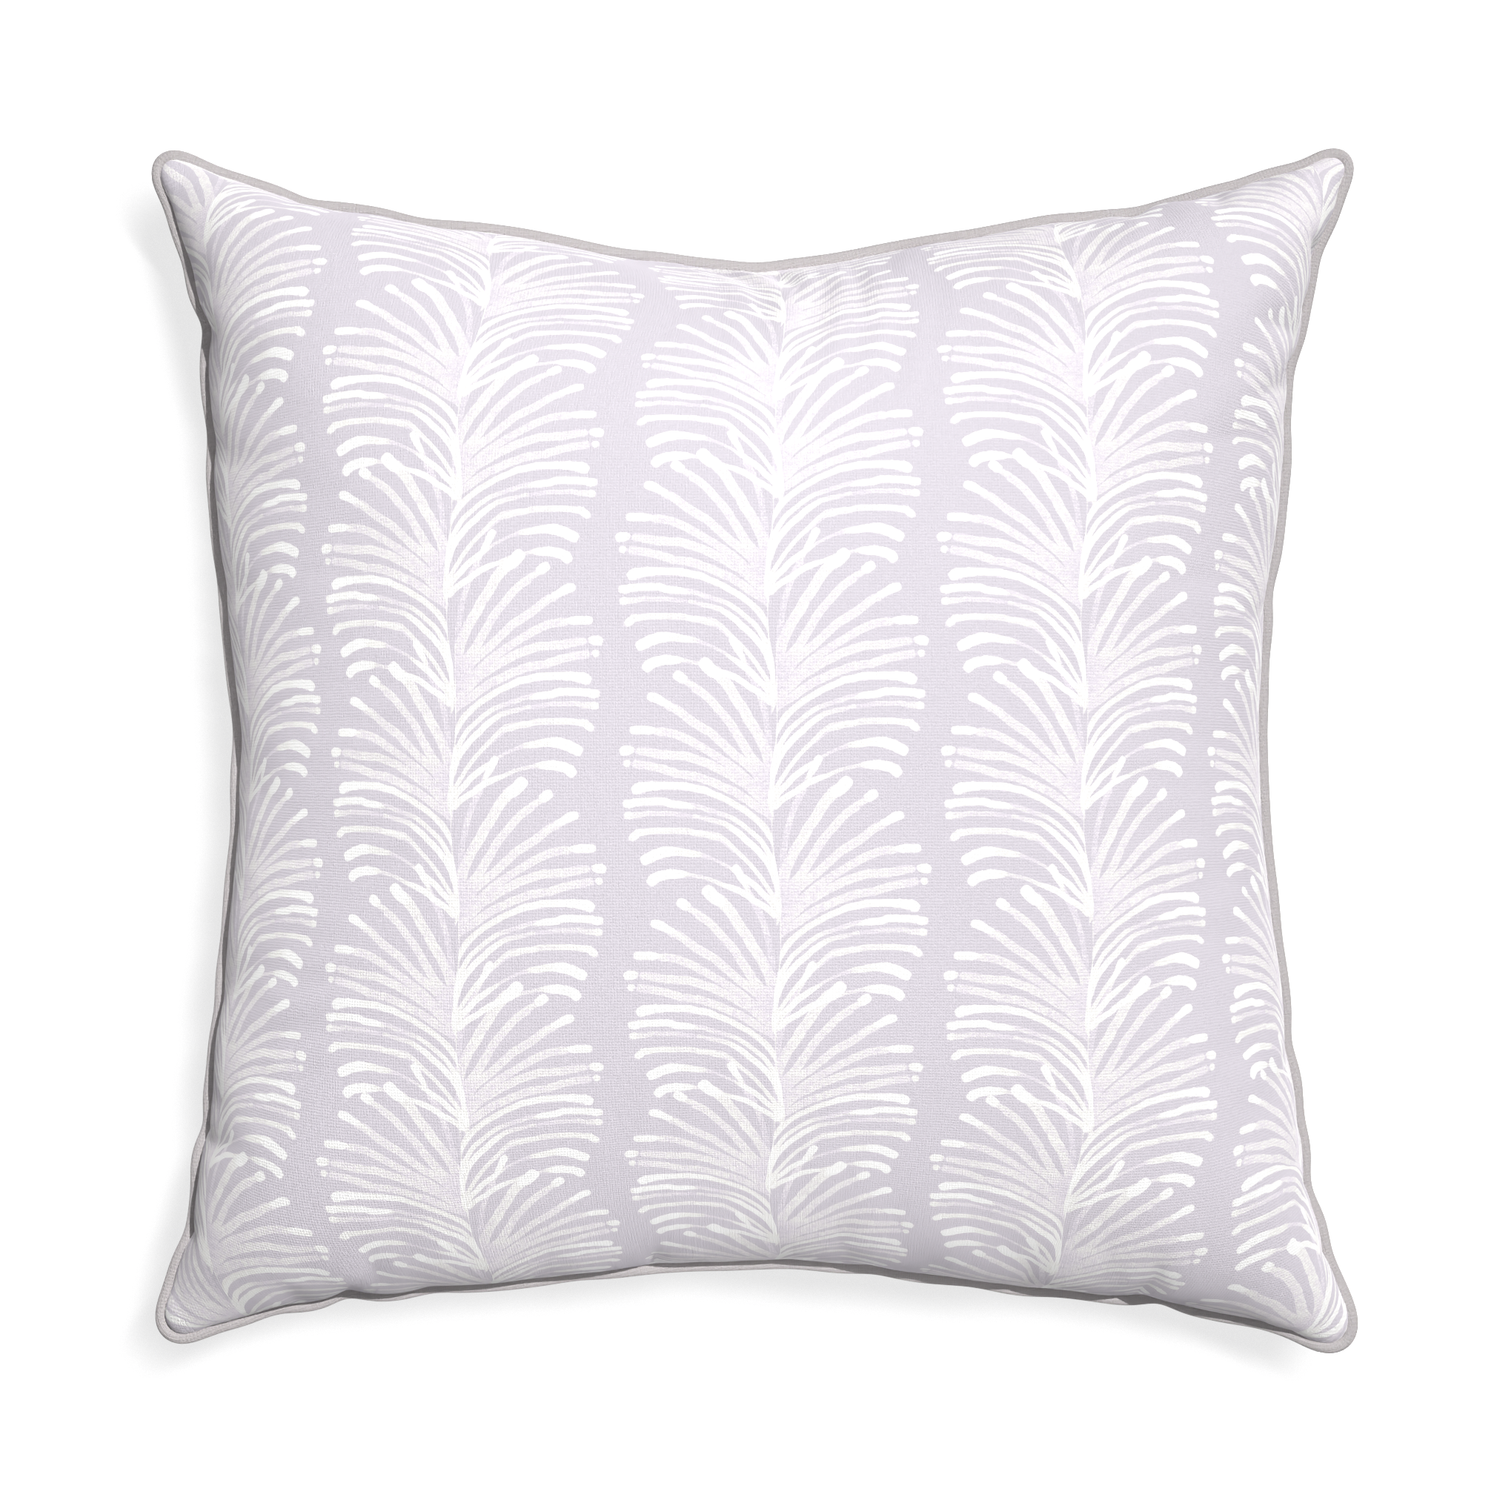 Euro-sham emma lavender custom pillow with pebble piping on white background